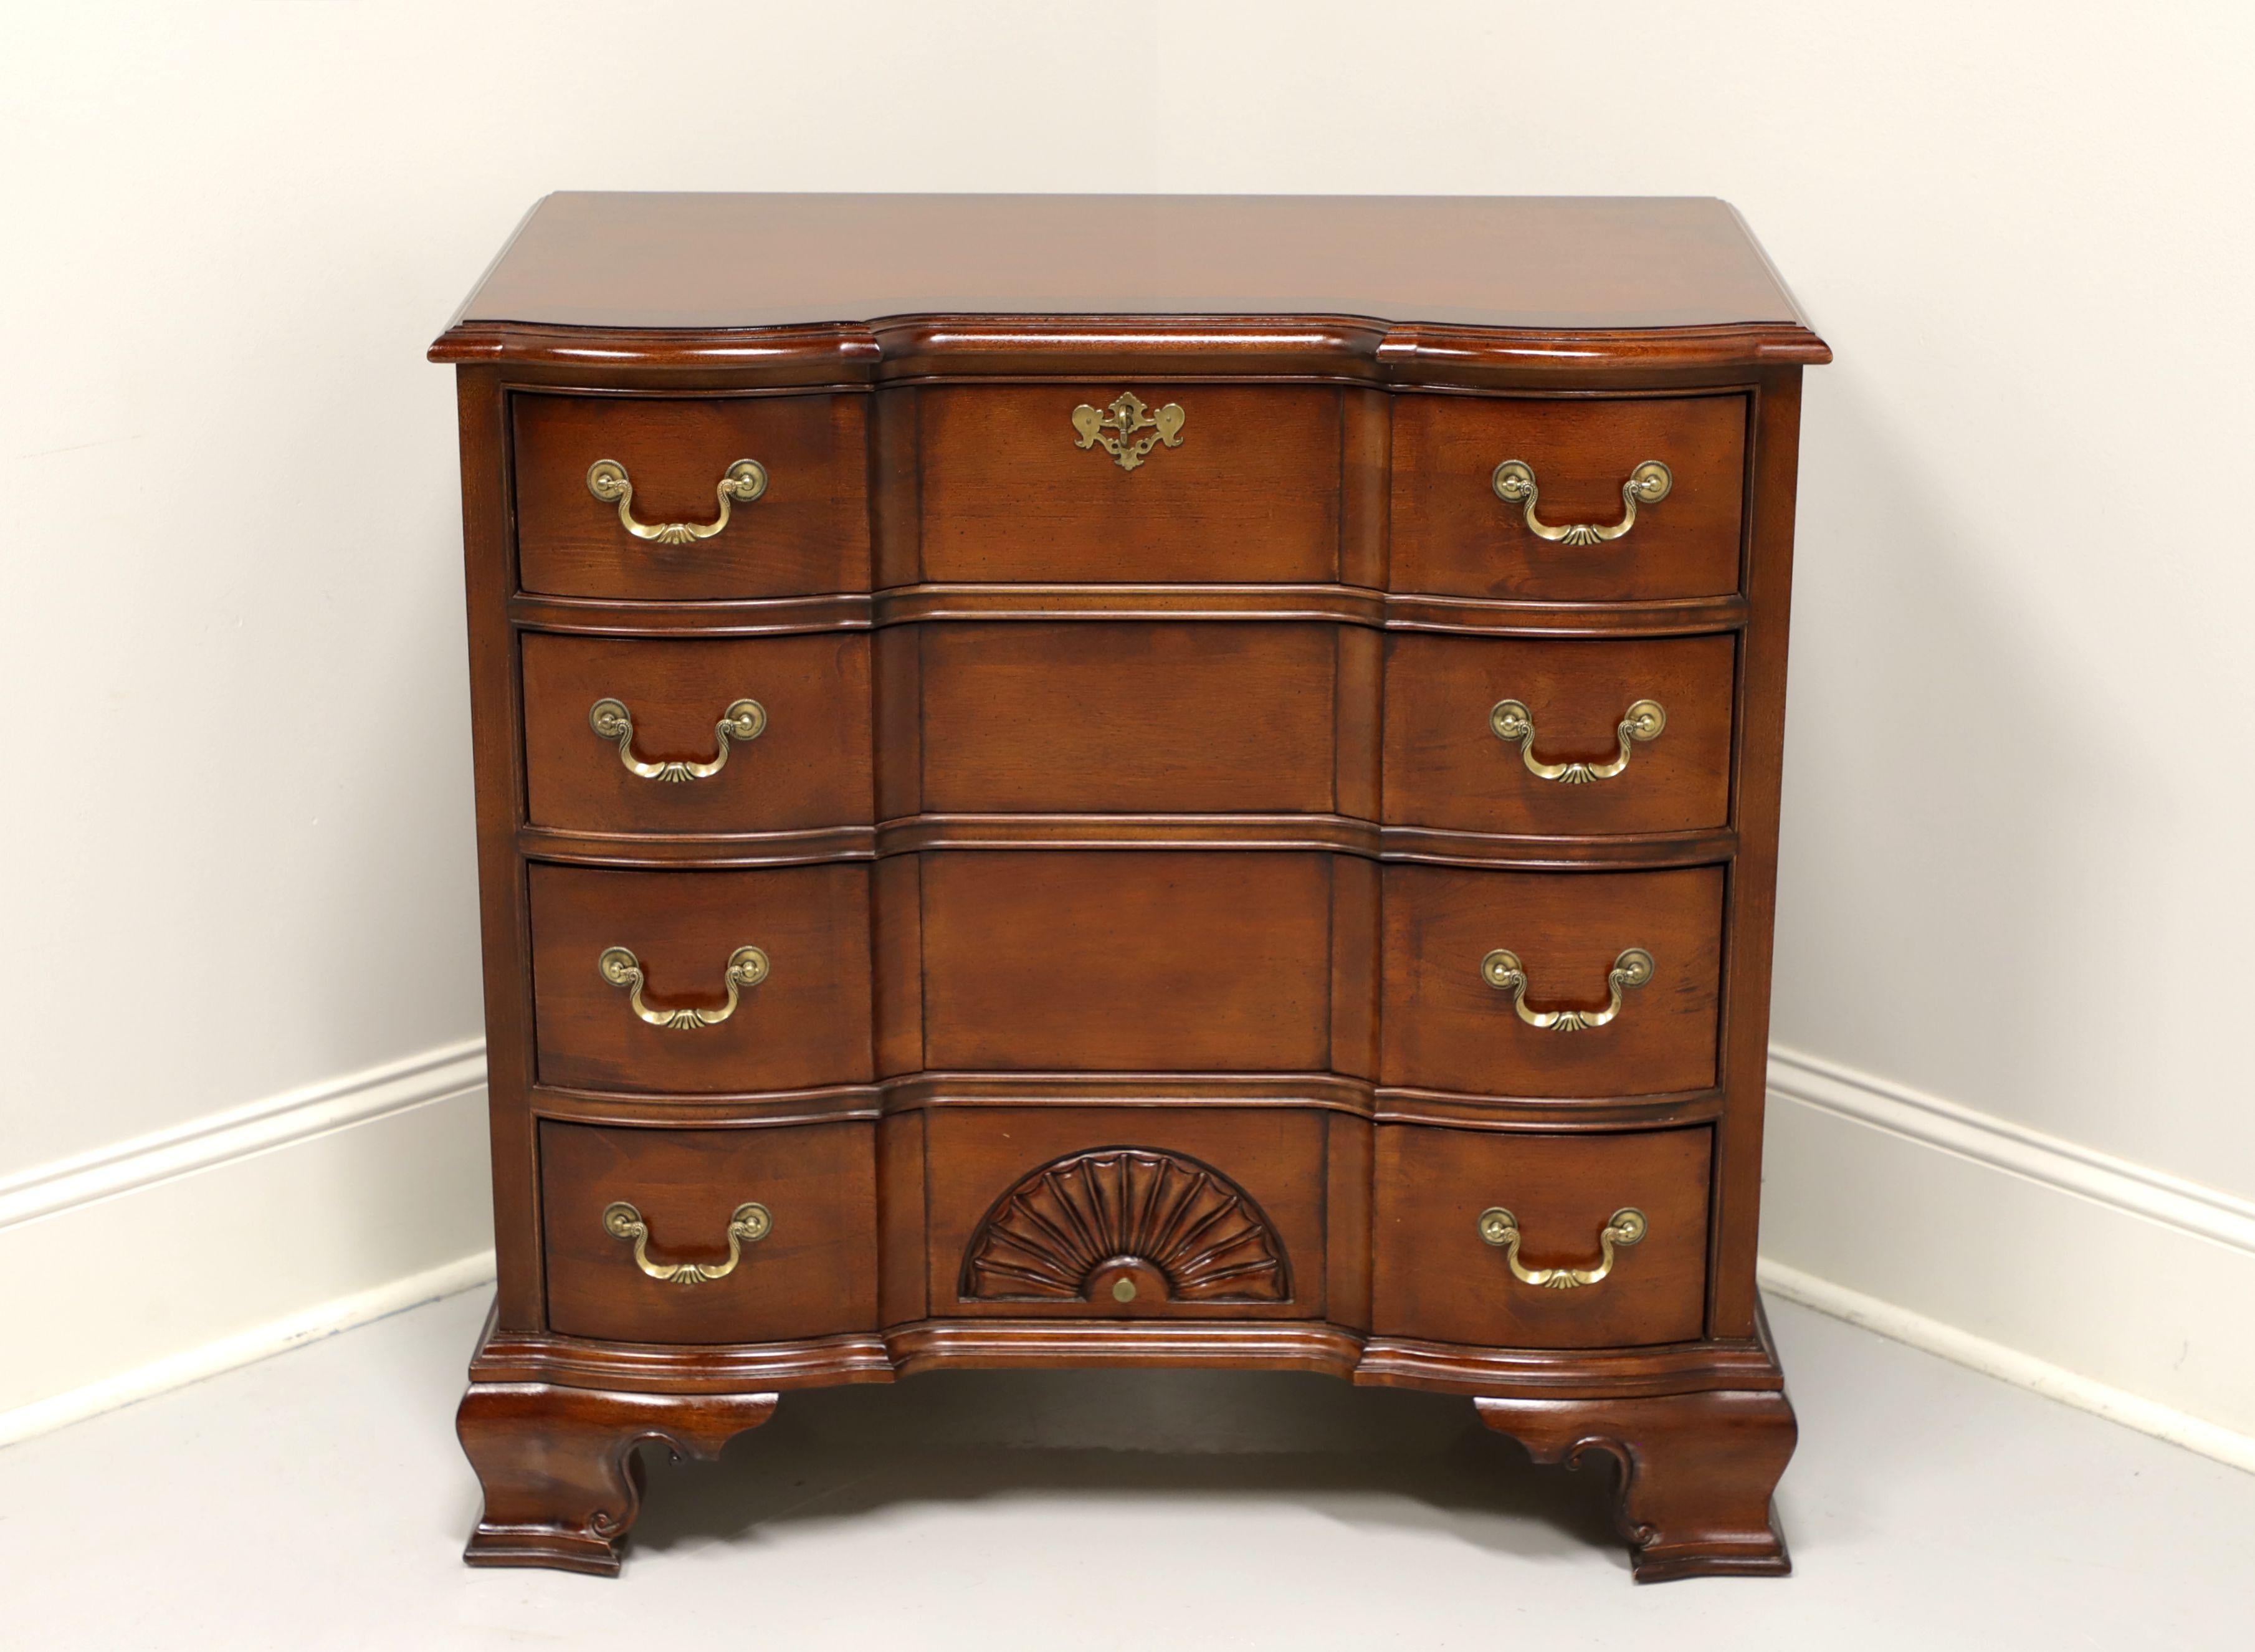 A Chippendale style block front bedside chest, unbranded. Cherry with brass hardware, open fan carving and ogee bracket feet. Features four drawers of dovetail construction, top drawer being lockable. Includes one key. Made in Asia, in the early